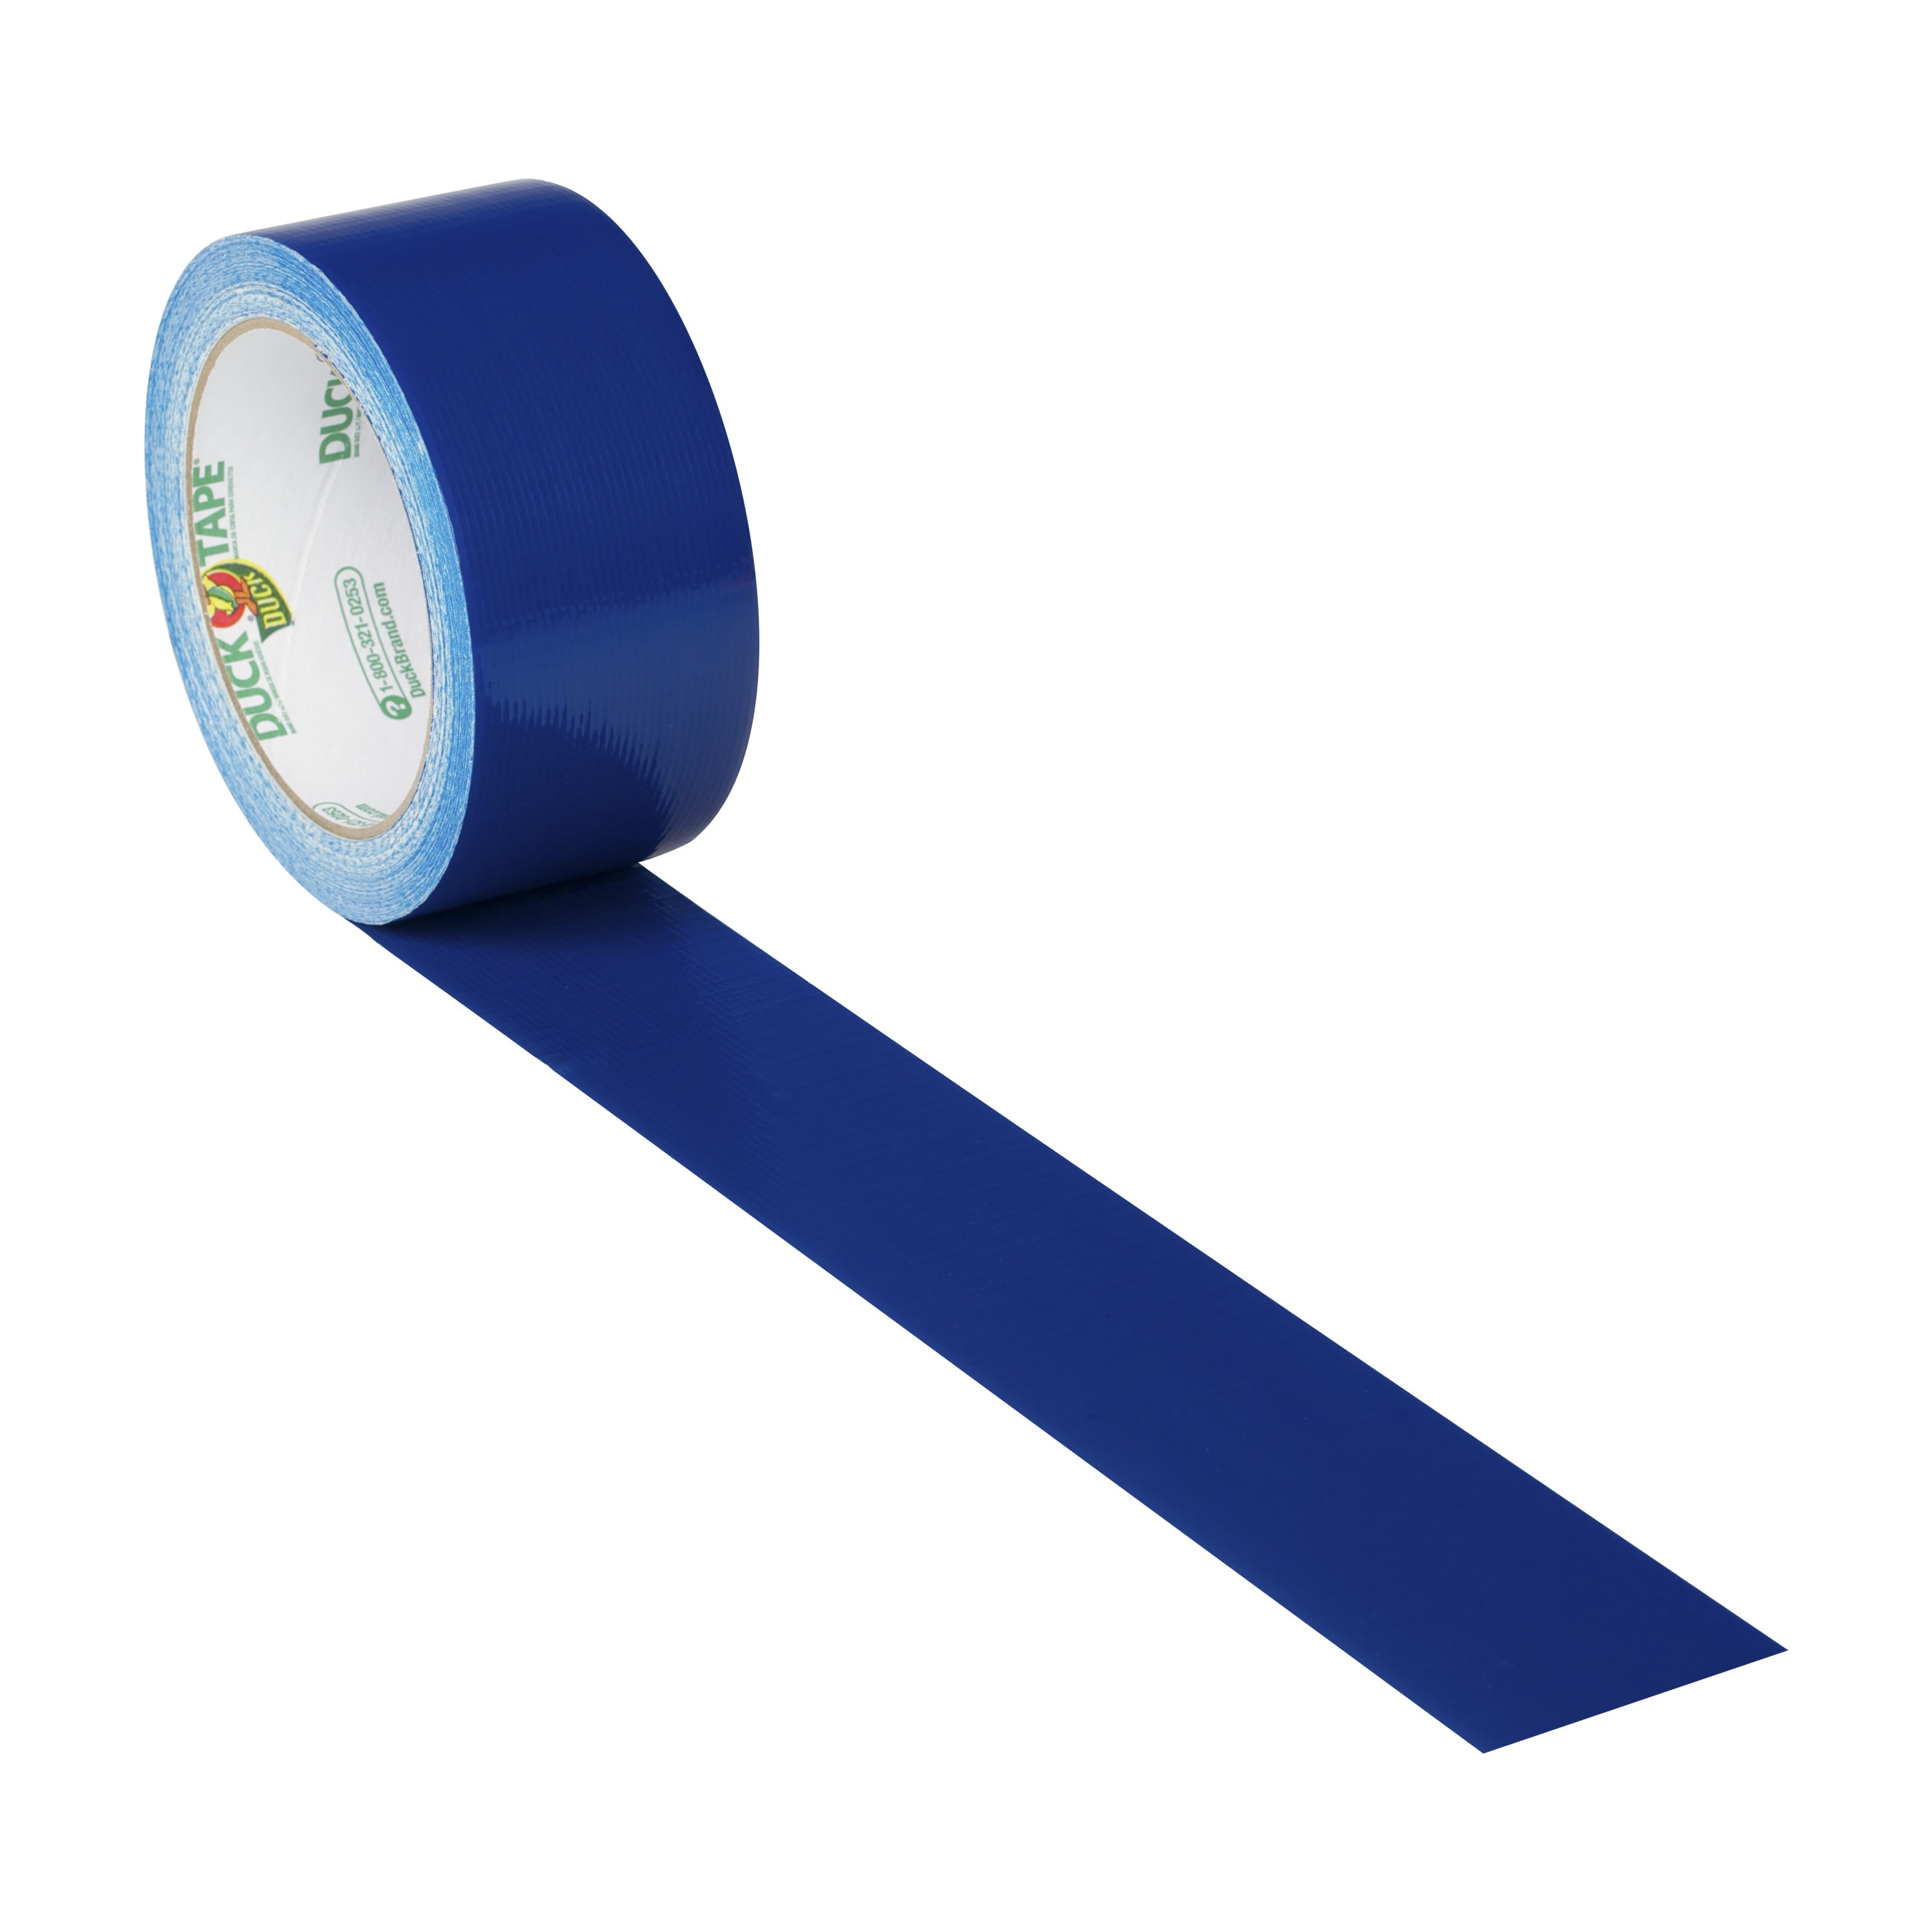 Duck® Double Sided Duct Tape - Blue, 1.41 in x 12 yd - City Market